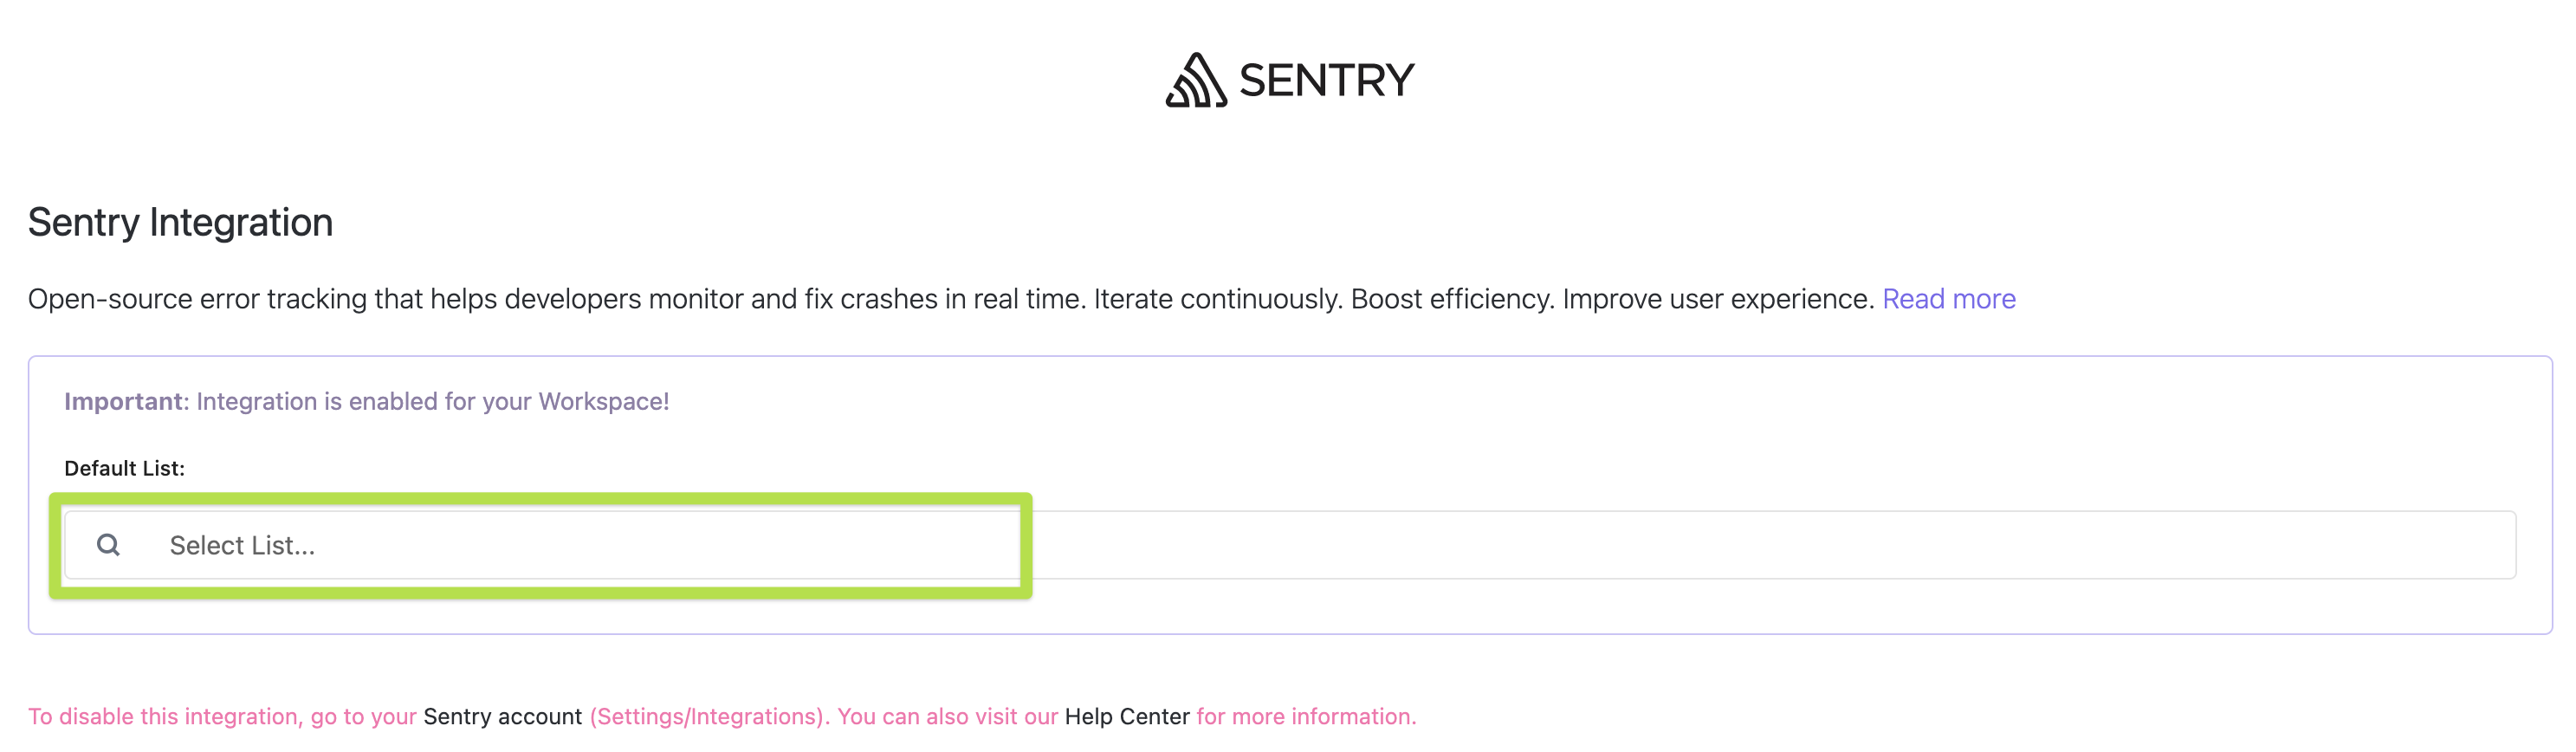 Screenshot of someone selecting a default List in Sentry.